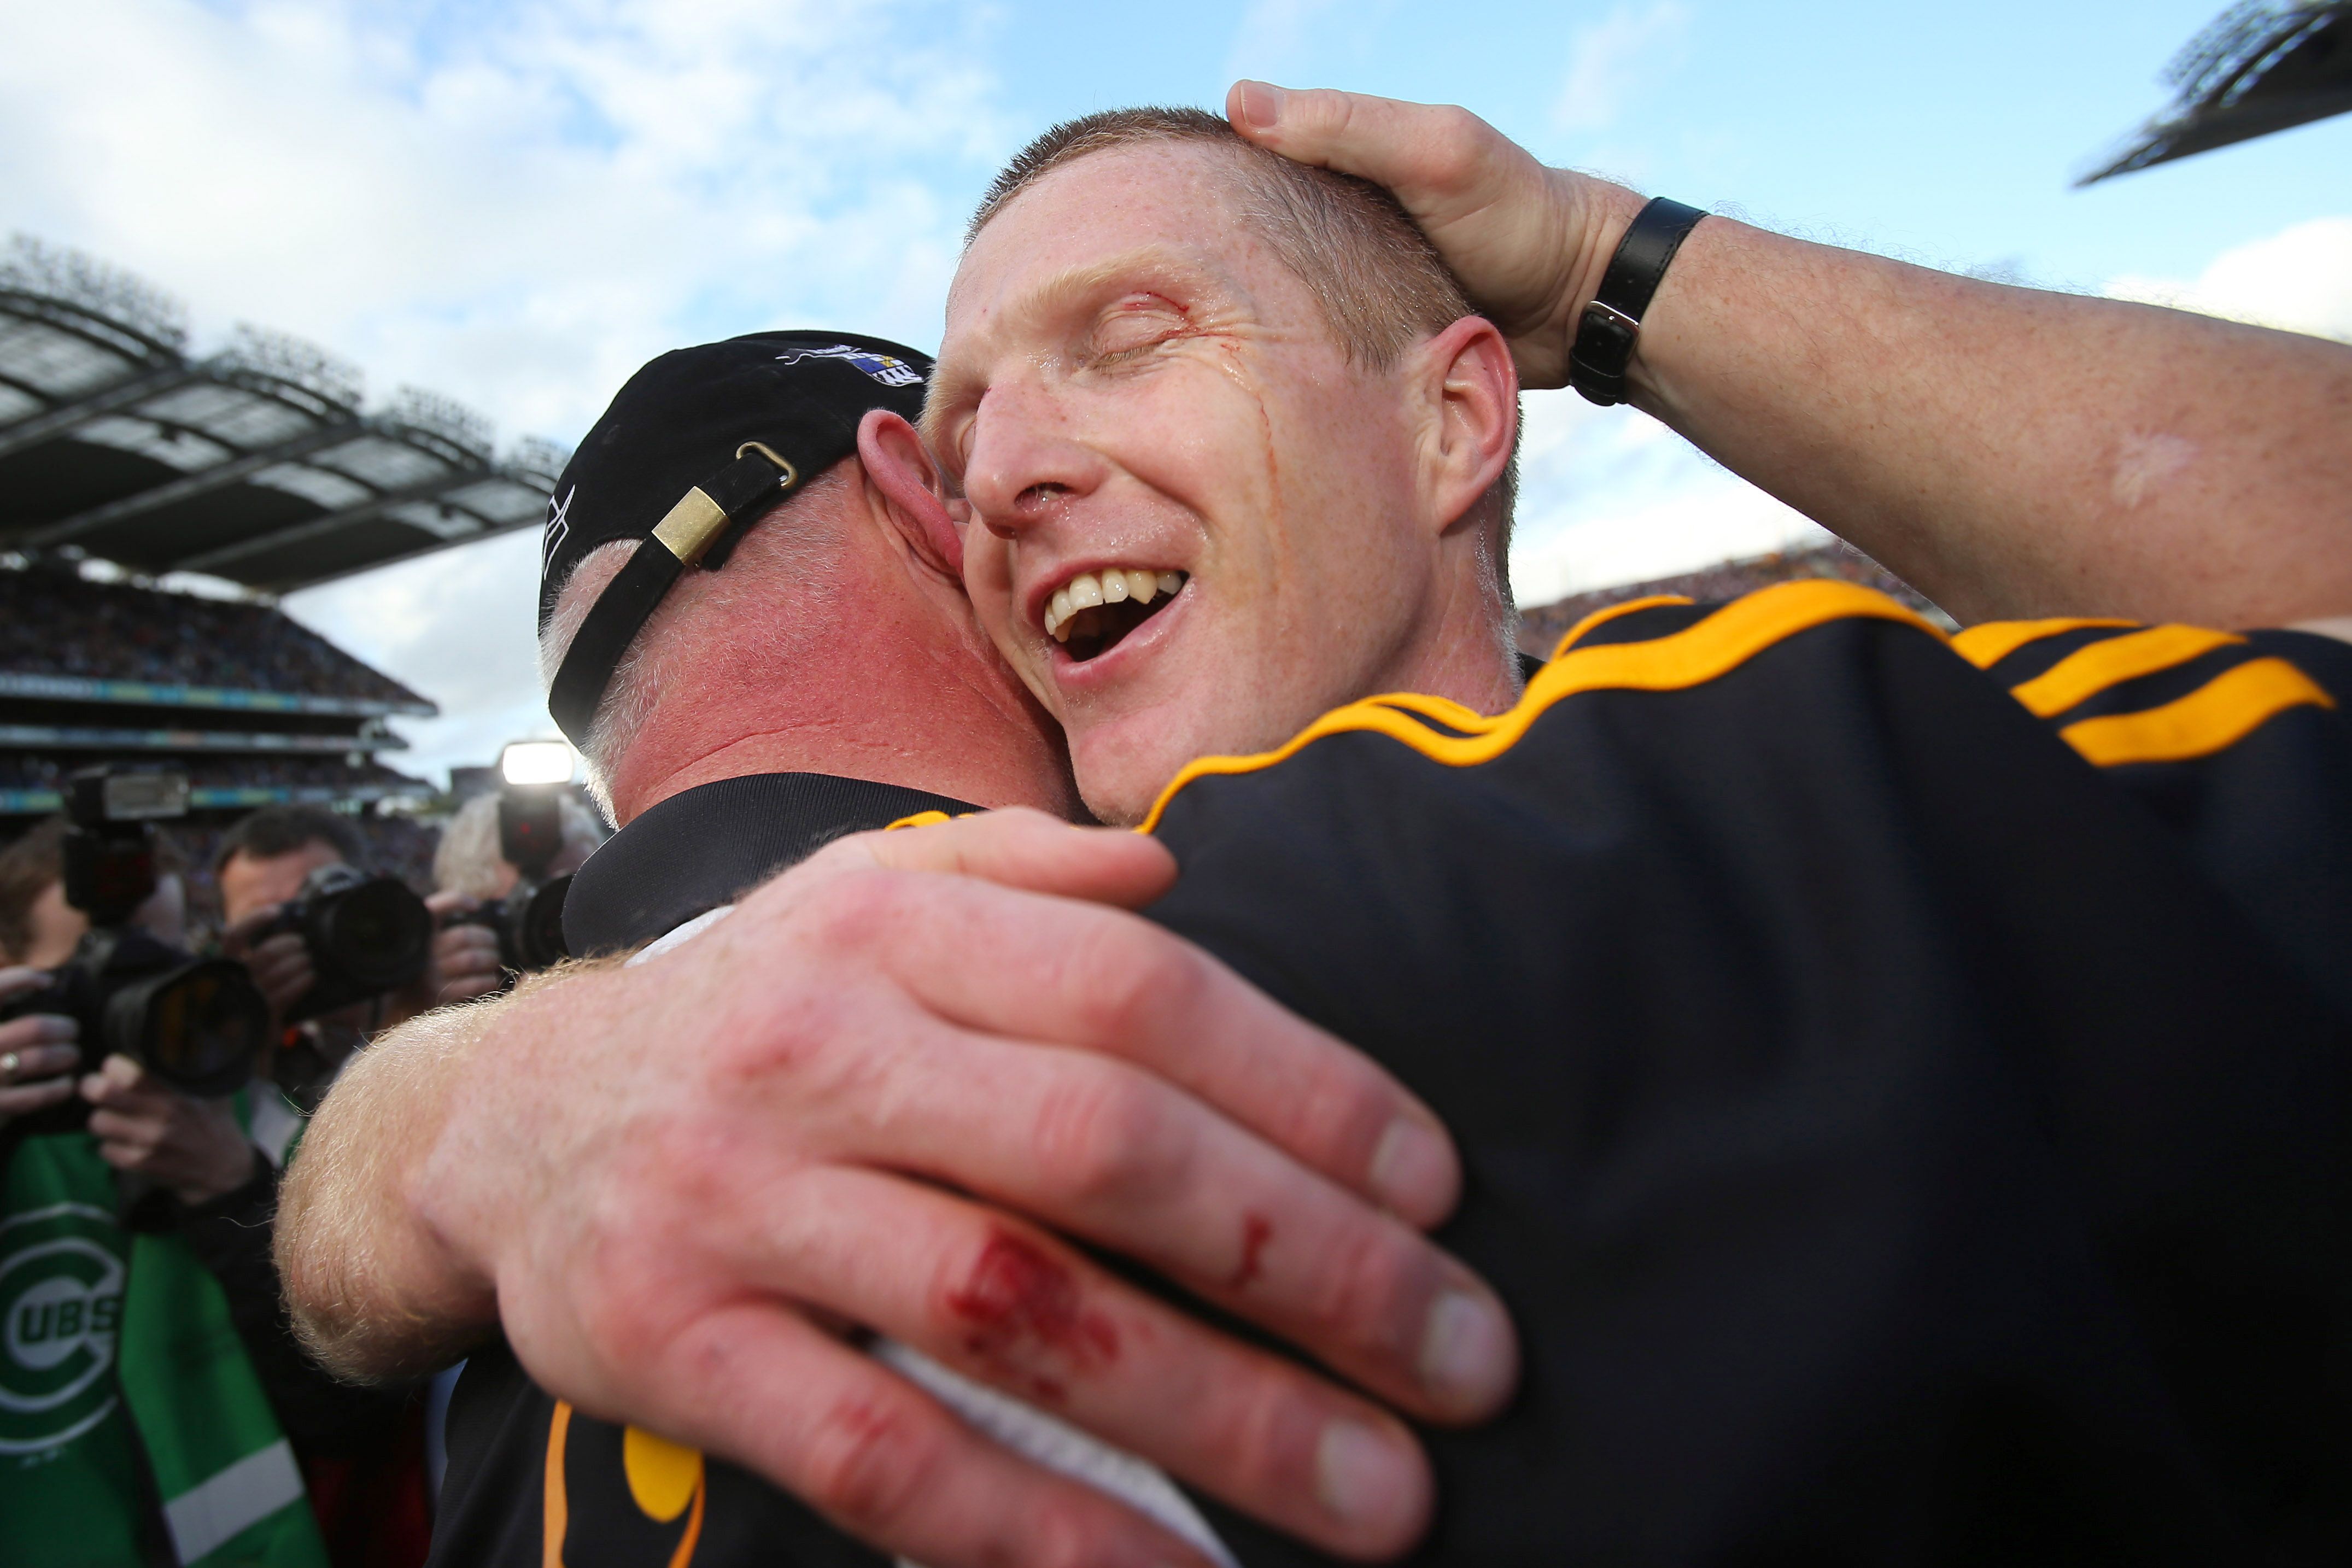 GAA Hurling All Ireland Senior Championship Final Replay 30/9/2012 Galway vs Kilkenny Kilkenny manager Brian Cody celebrates with Henry Shefflin after the game Mandatory Credit ©INPHO/Cathal Noonan